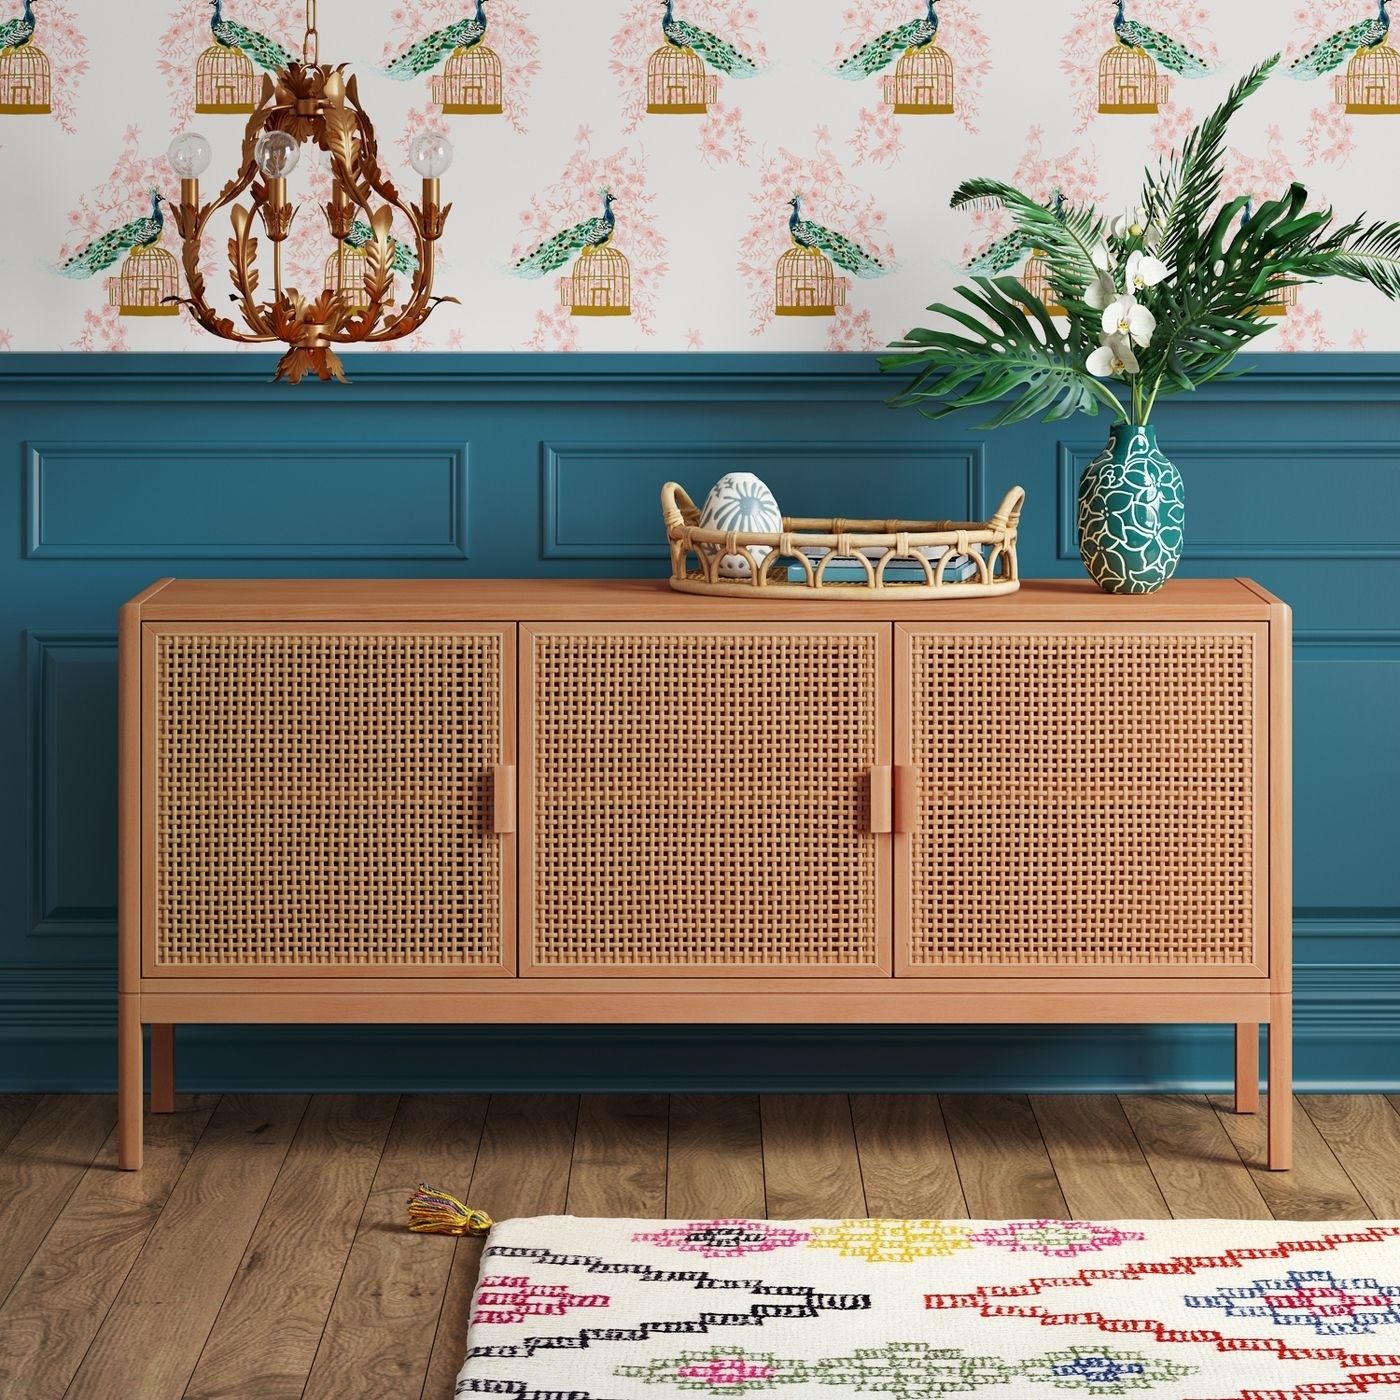 Perforated wood TV stand against teal wall paneling